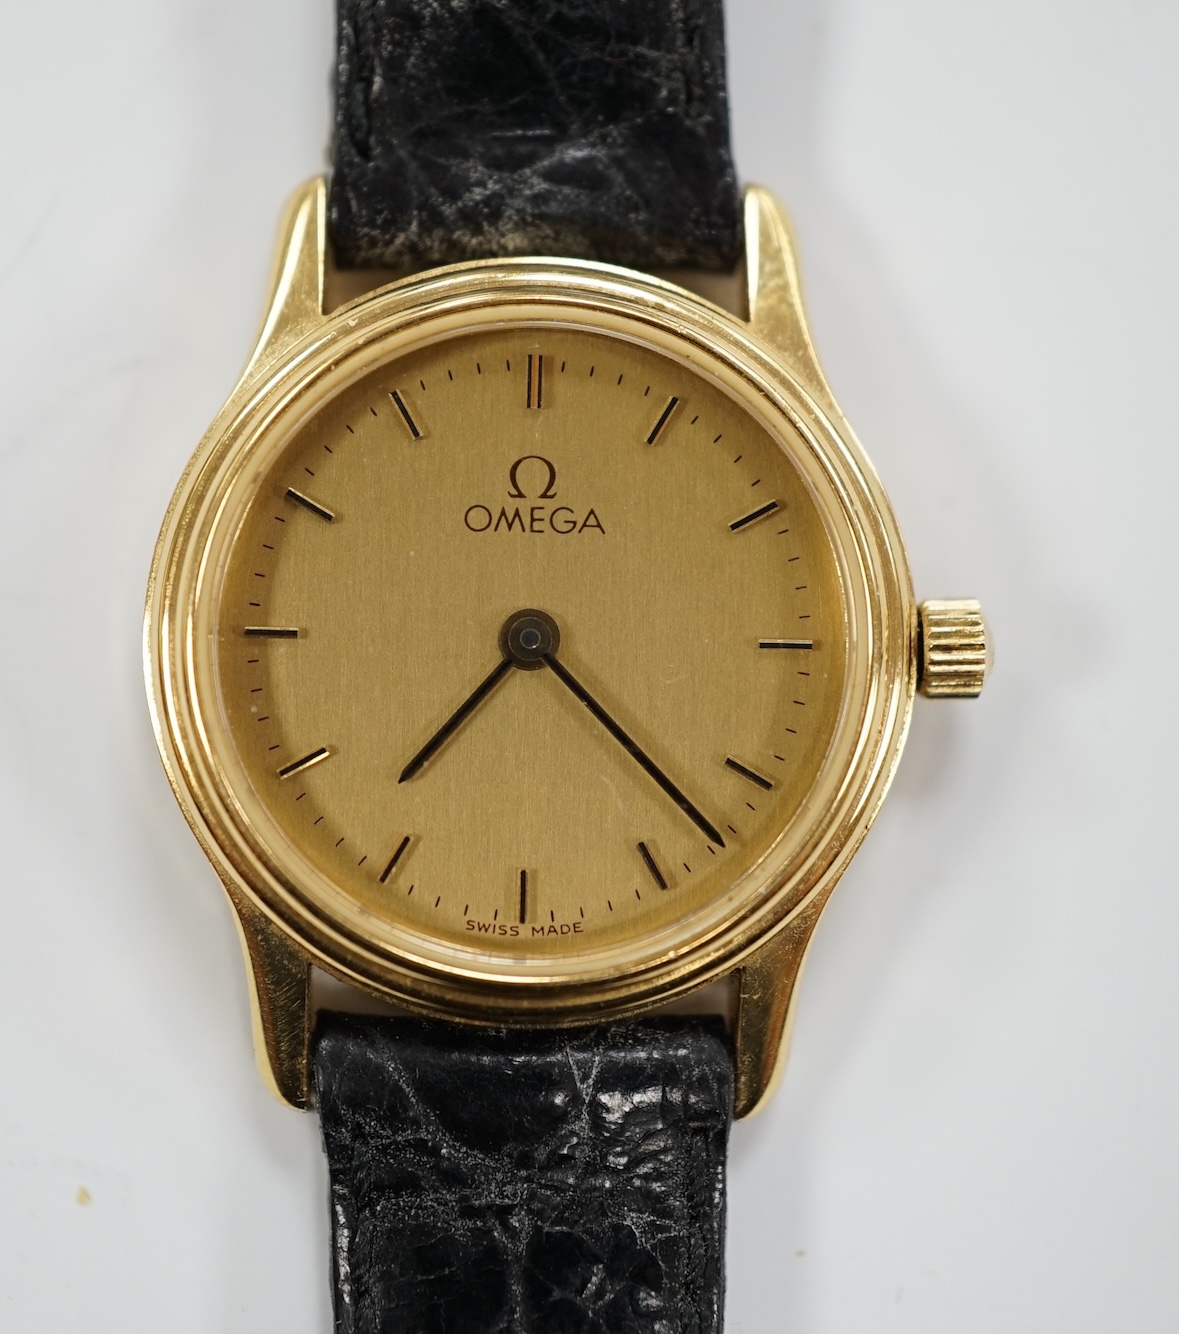 A lady's 9ct gold Omega quartz wrist watch, with case back inscription, on a leather strap with Omega buckle, with Omega box.